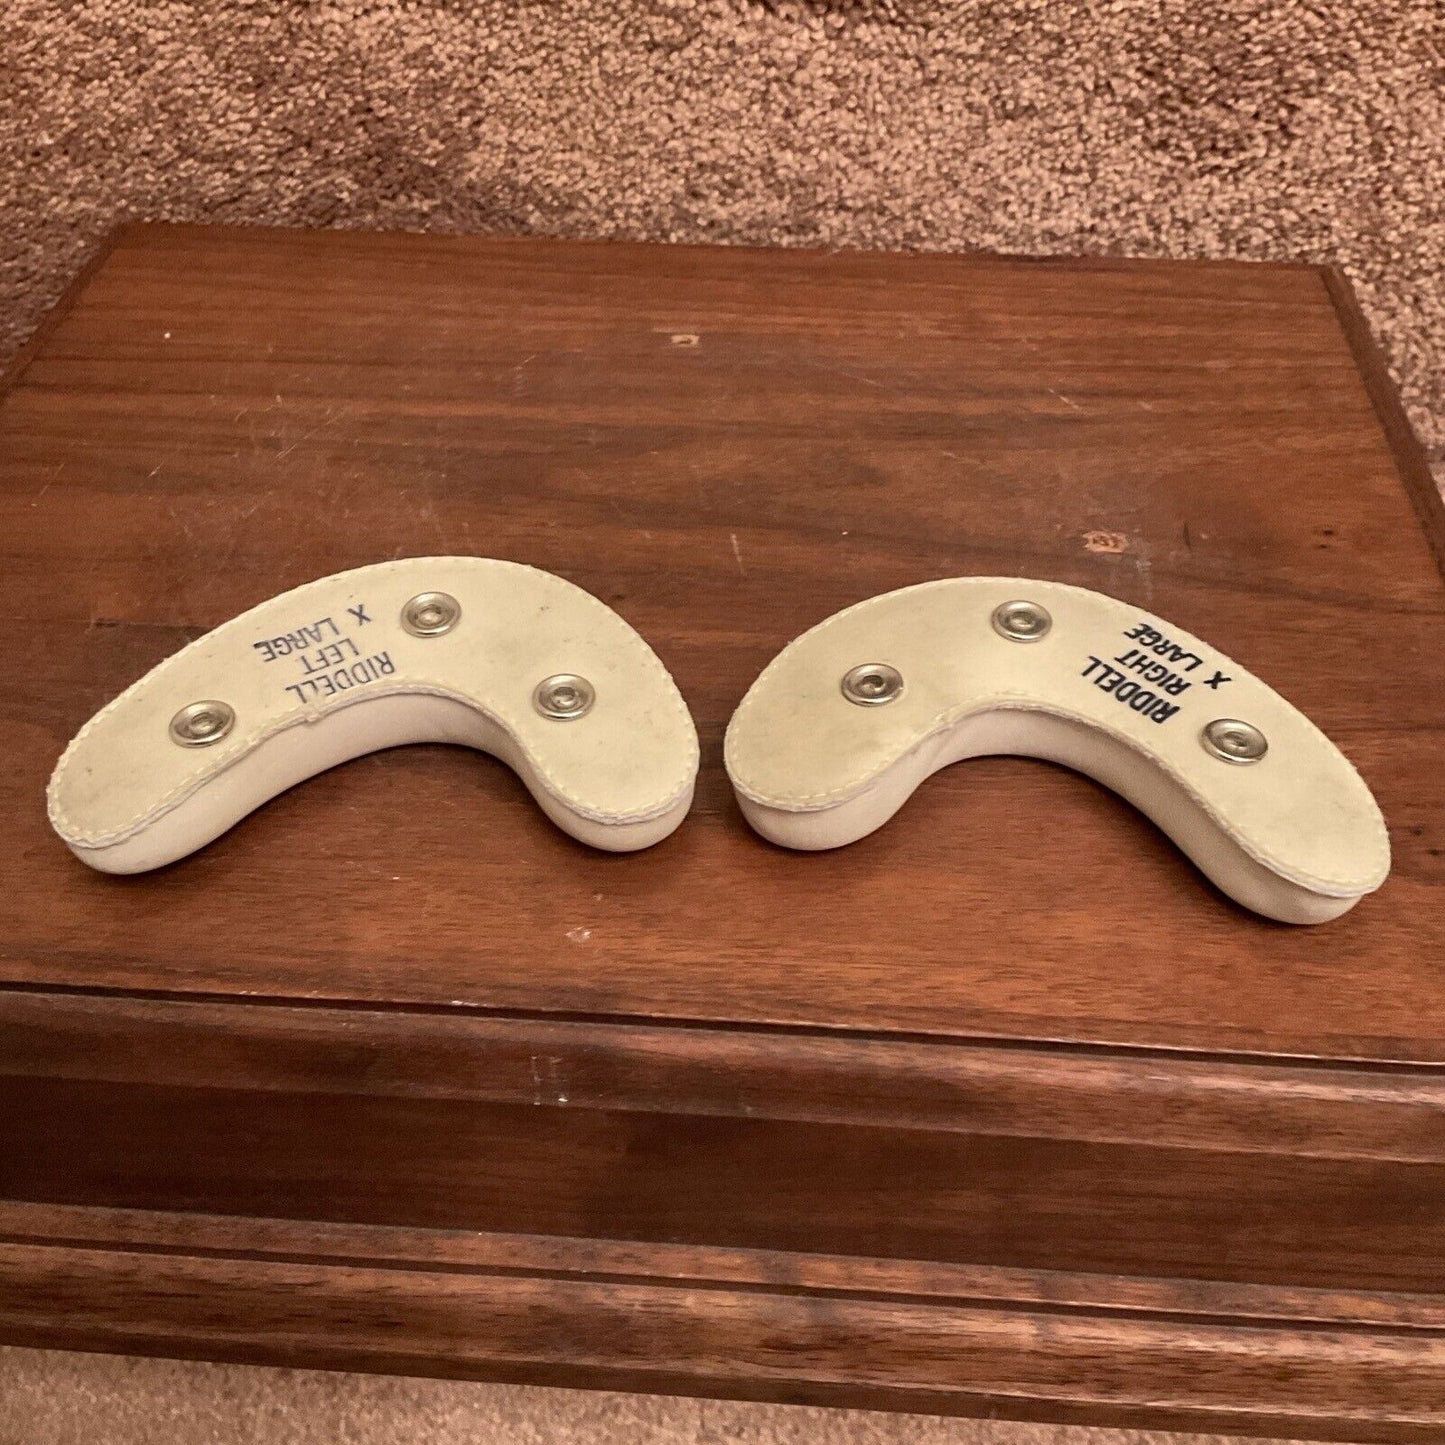 Authentic Vintage Riddell X-Large Football Helmet Jaw Pads Minty & still pliable Sporting Goods:Team Sports:Football:Clothing, Shoes & Accessories:Helmets & Hats Riddell   